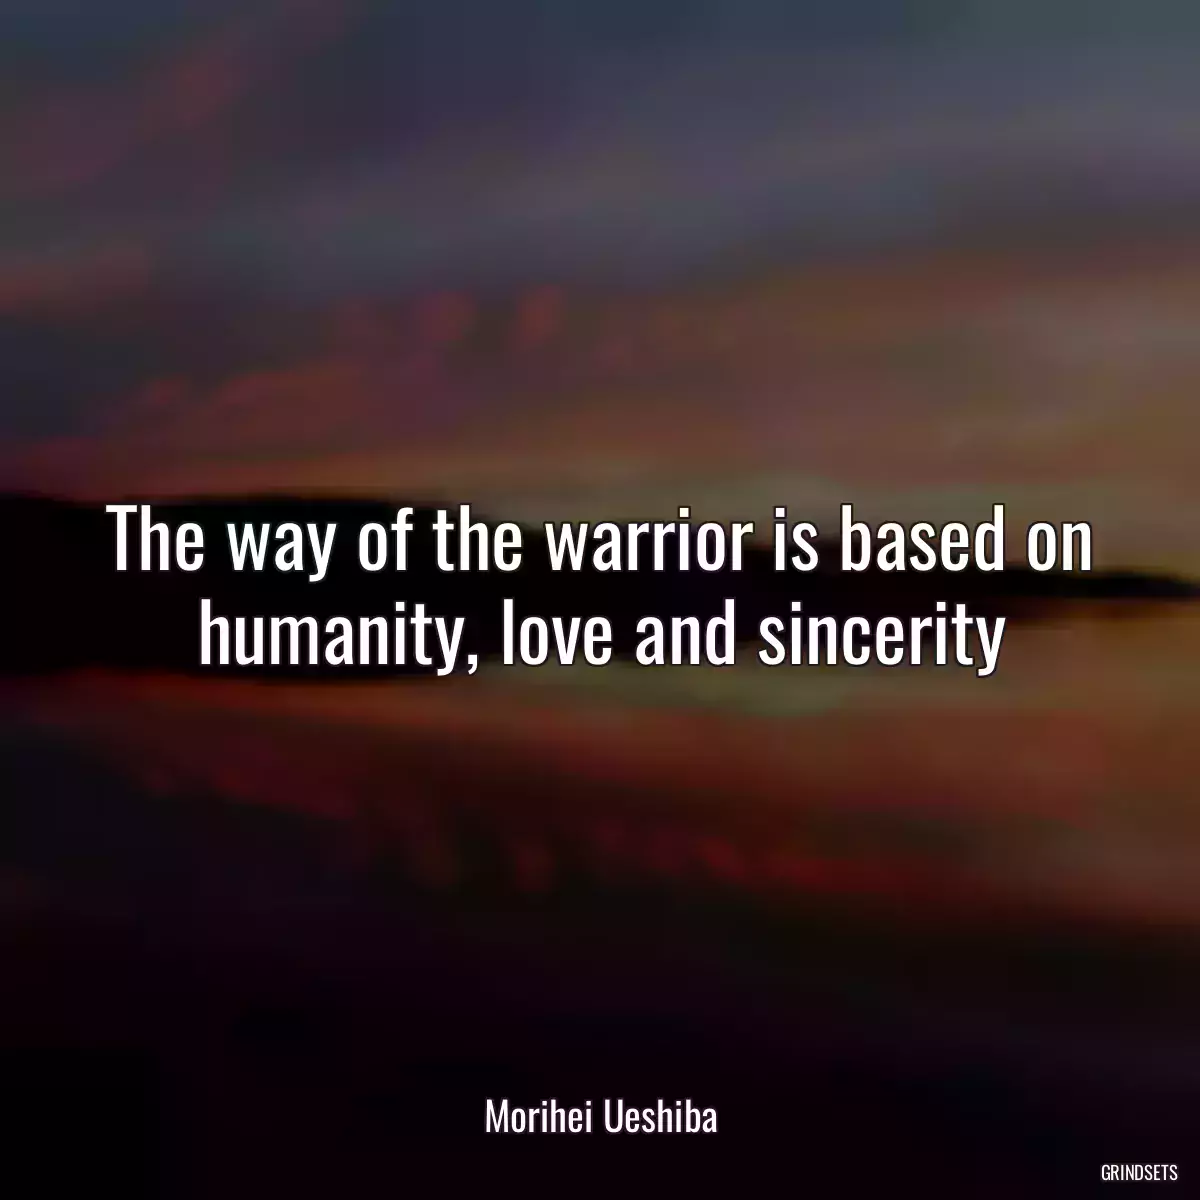 The way of the warrior is based on humanity, love and sincerity